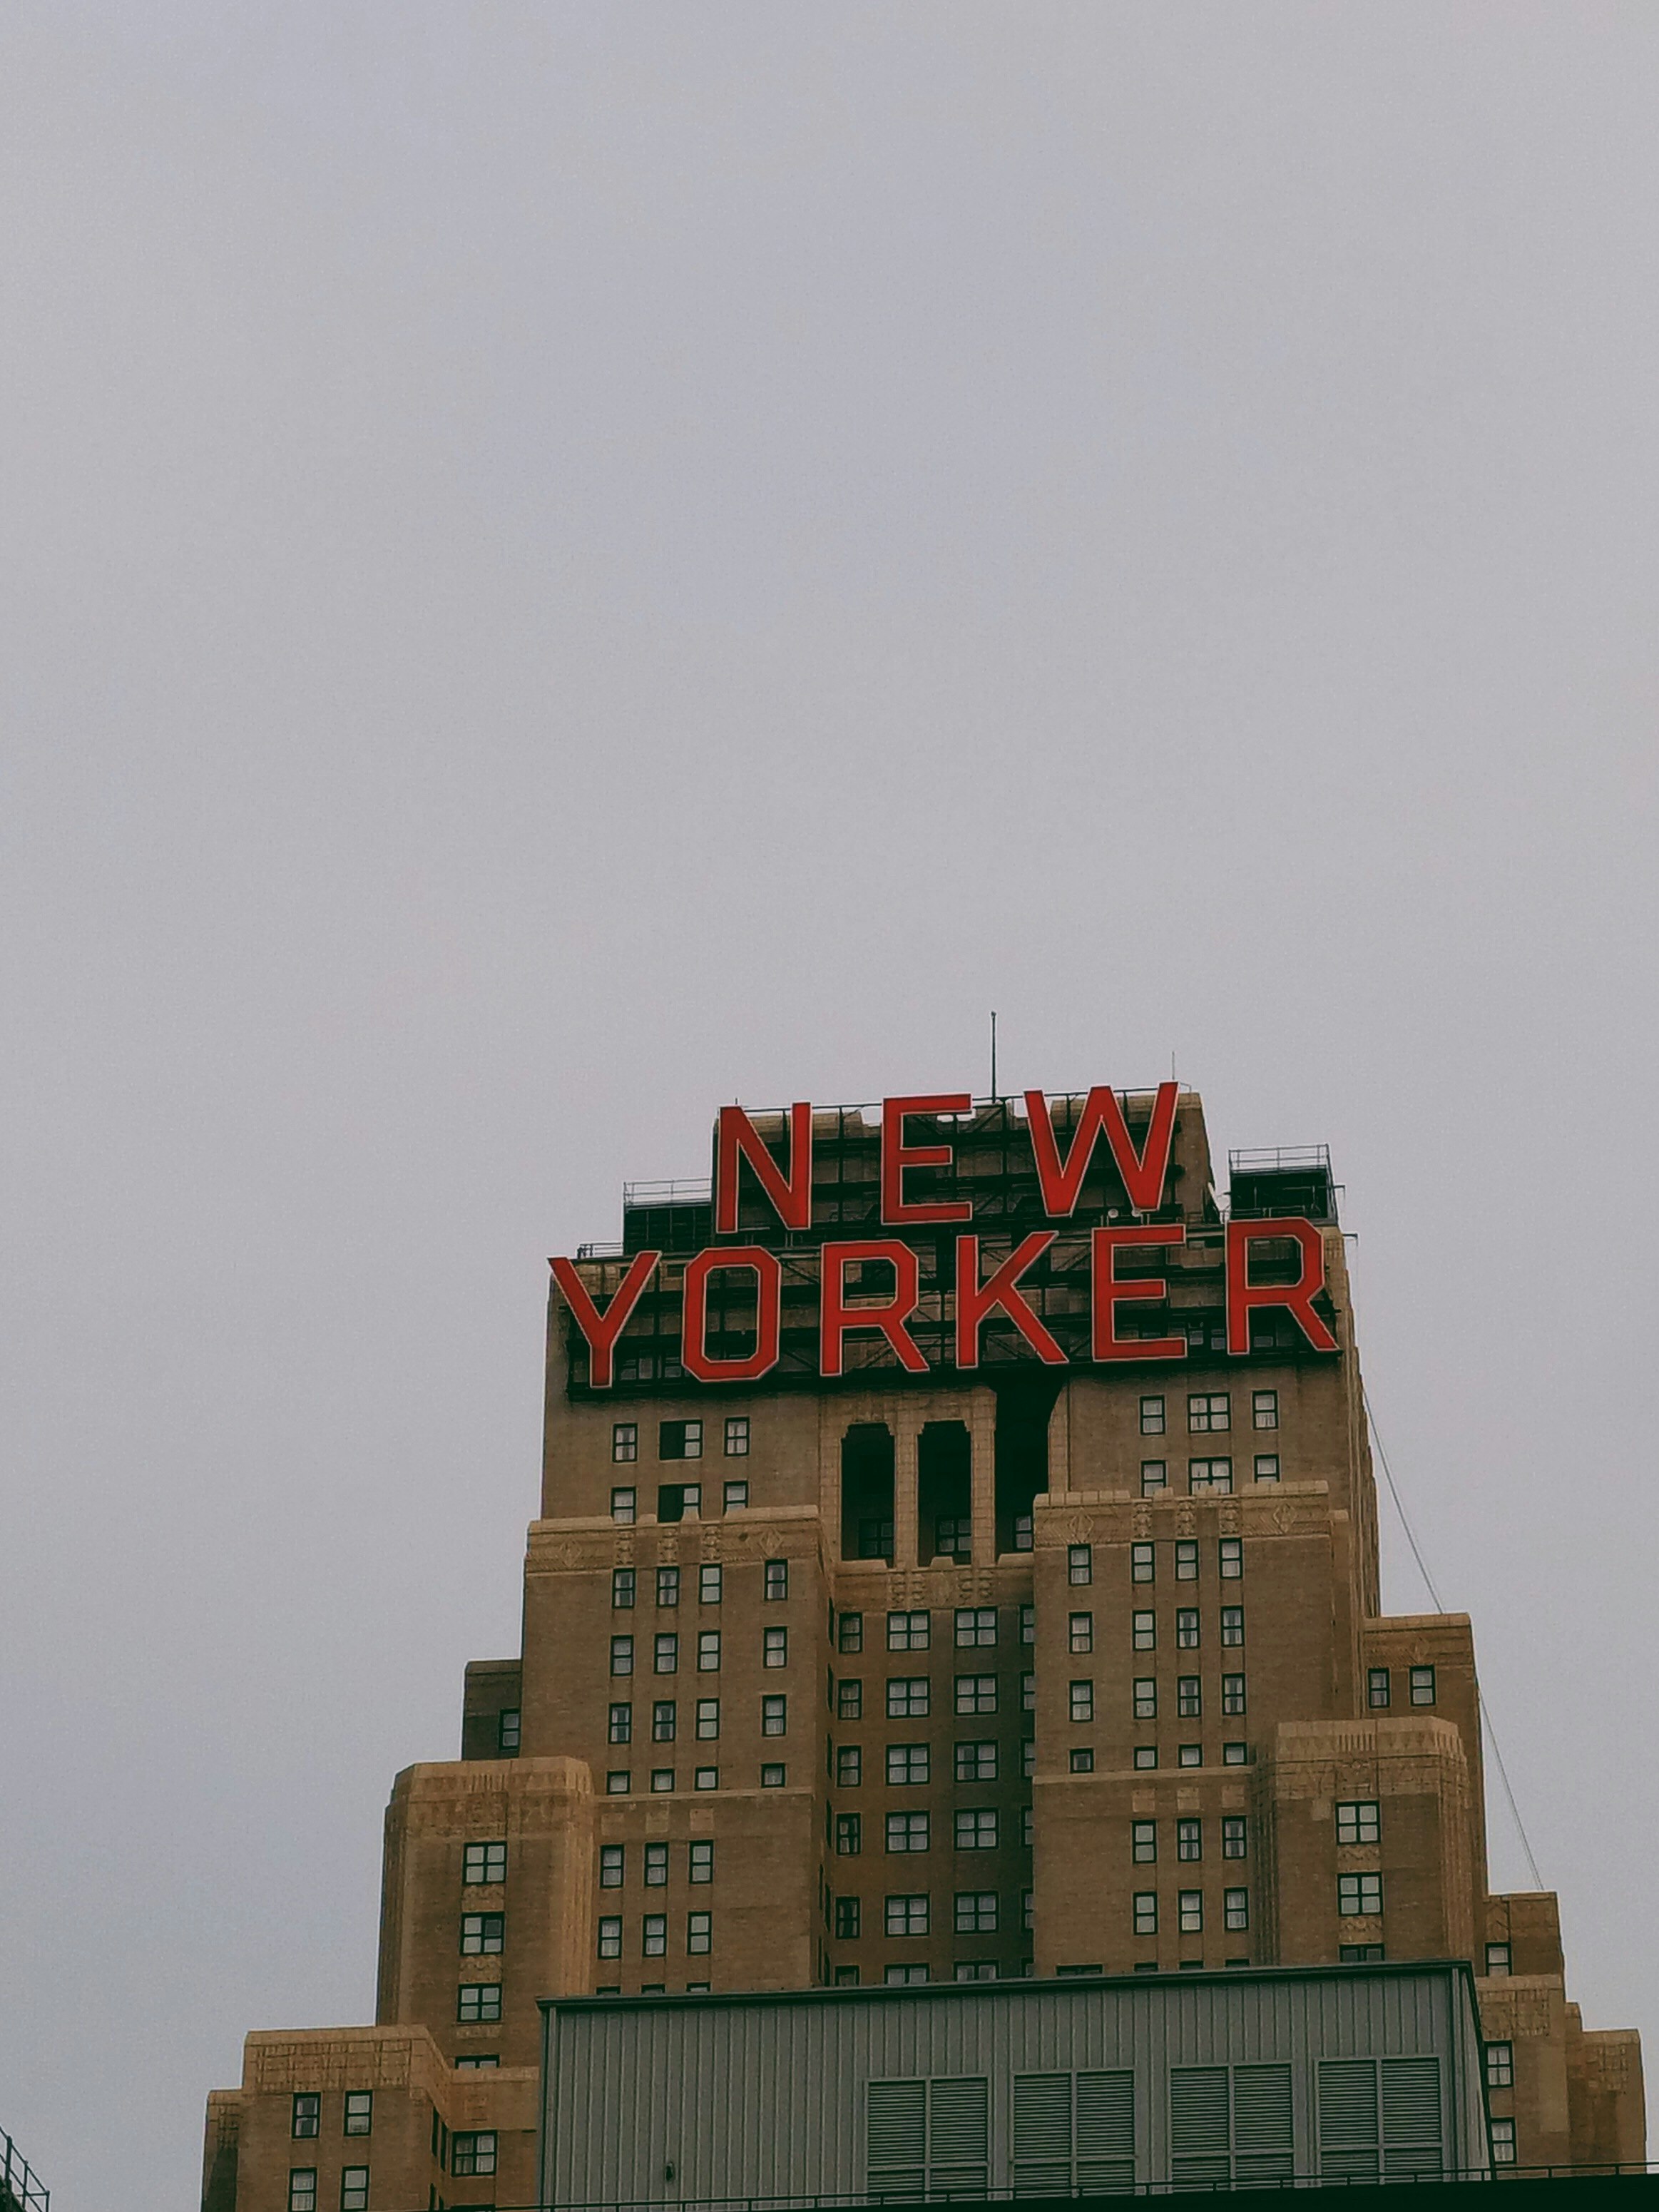 New Yorker Tower